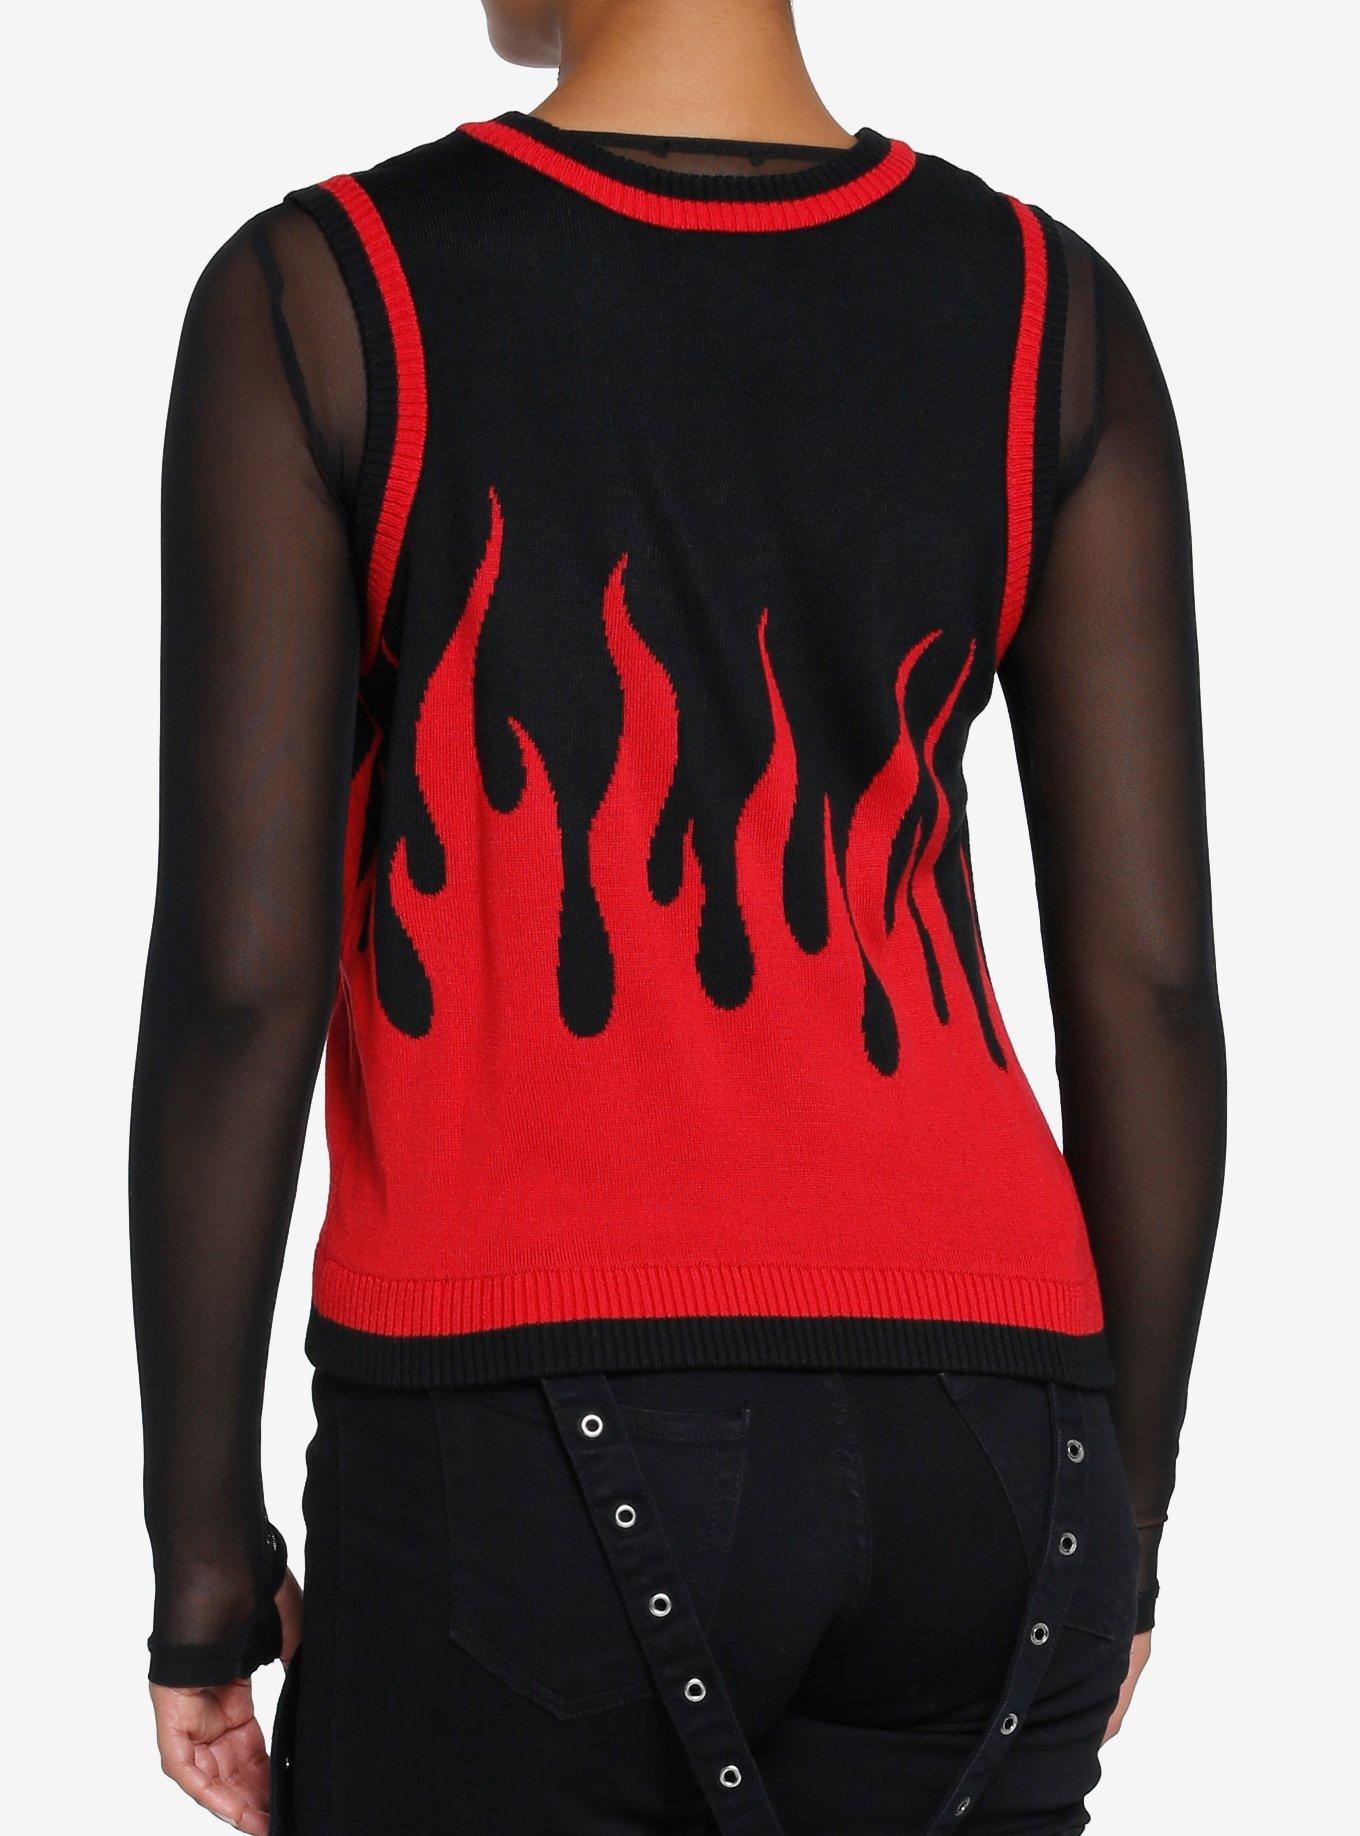 Social Collision Black & Red Flame Girls Sweater Vest